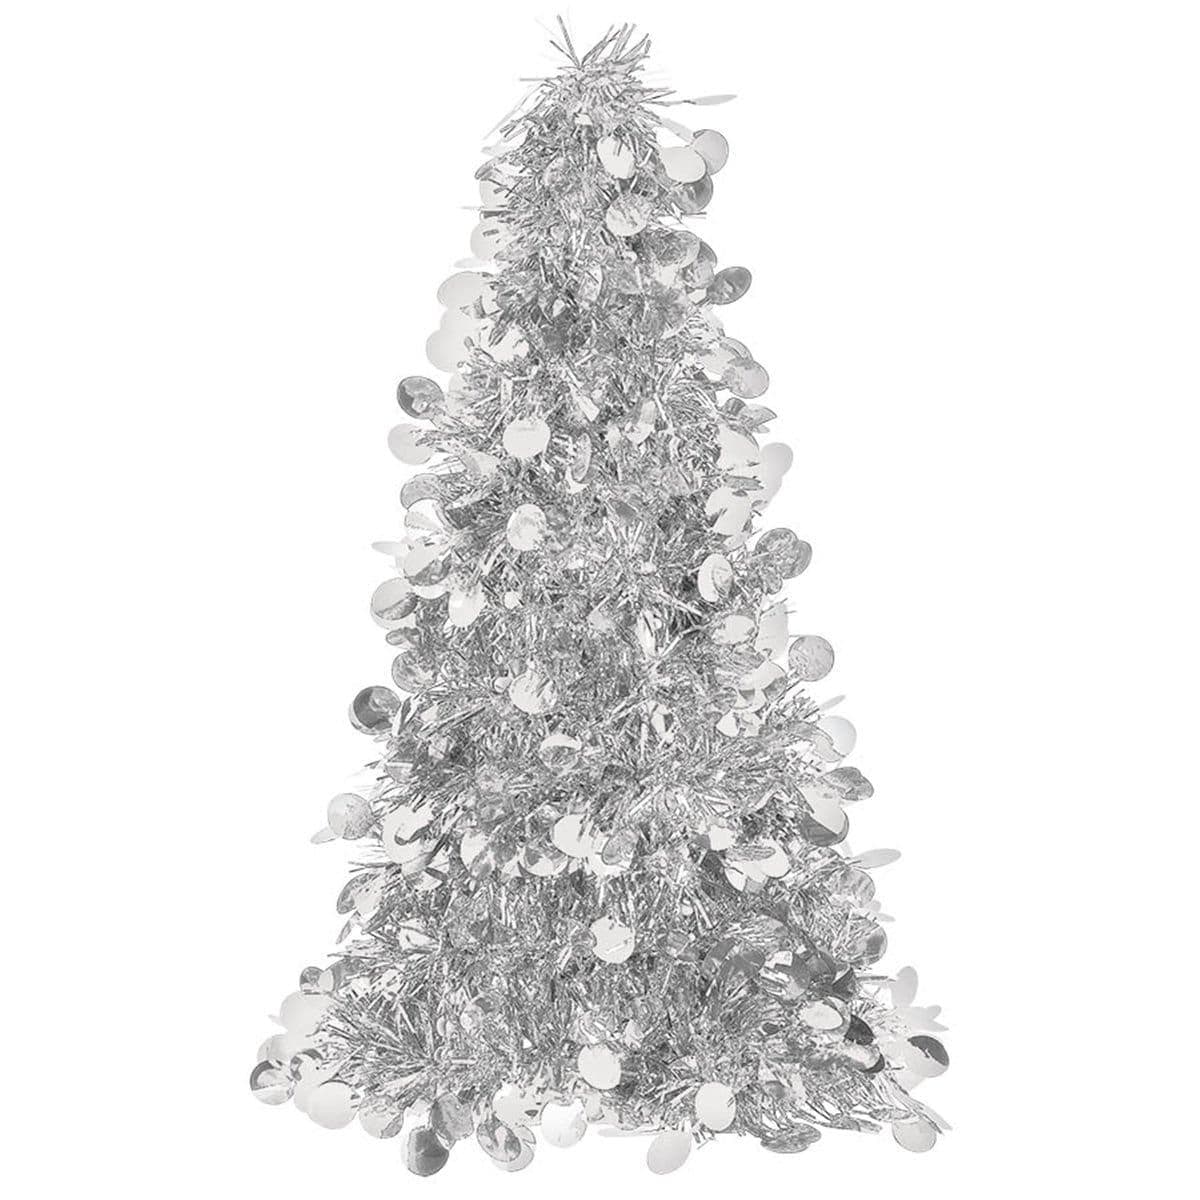 Buy Christmas Small Tree Centerpiece - Silver sold at Party Expert